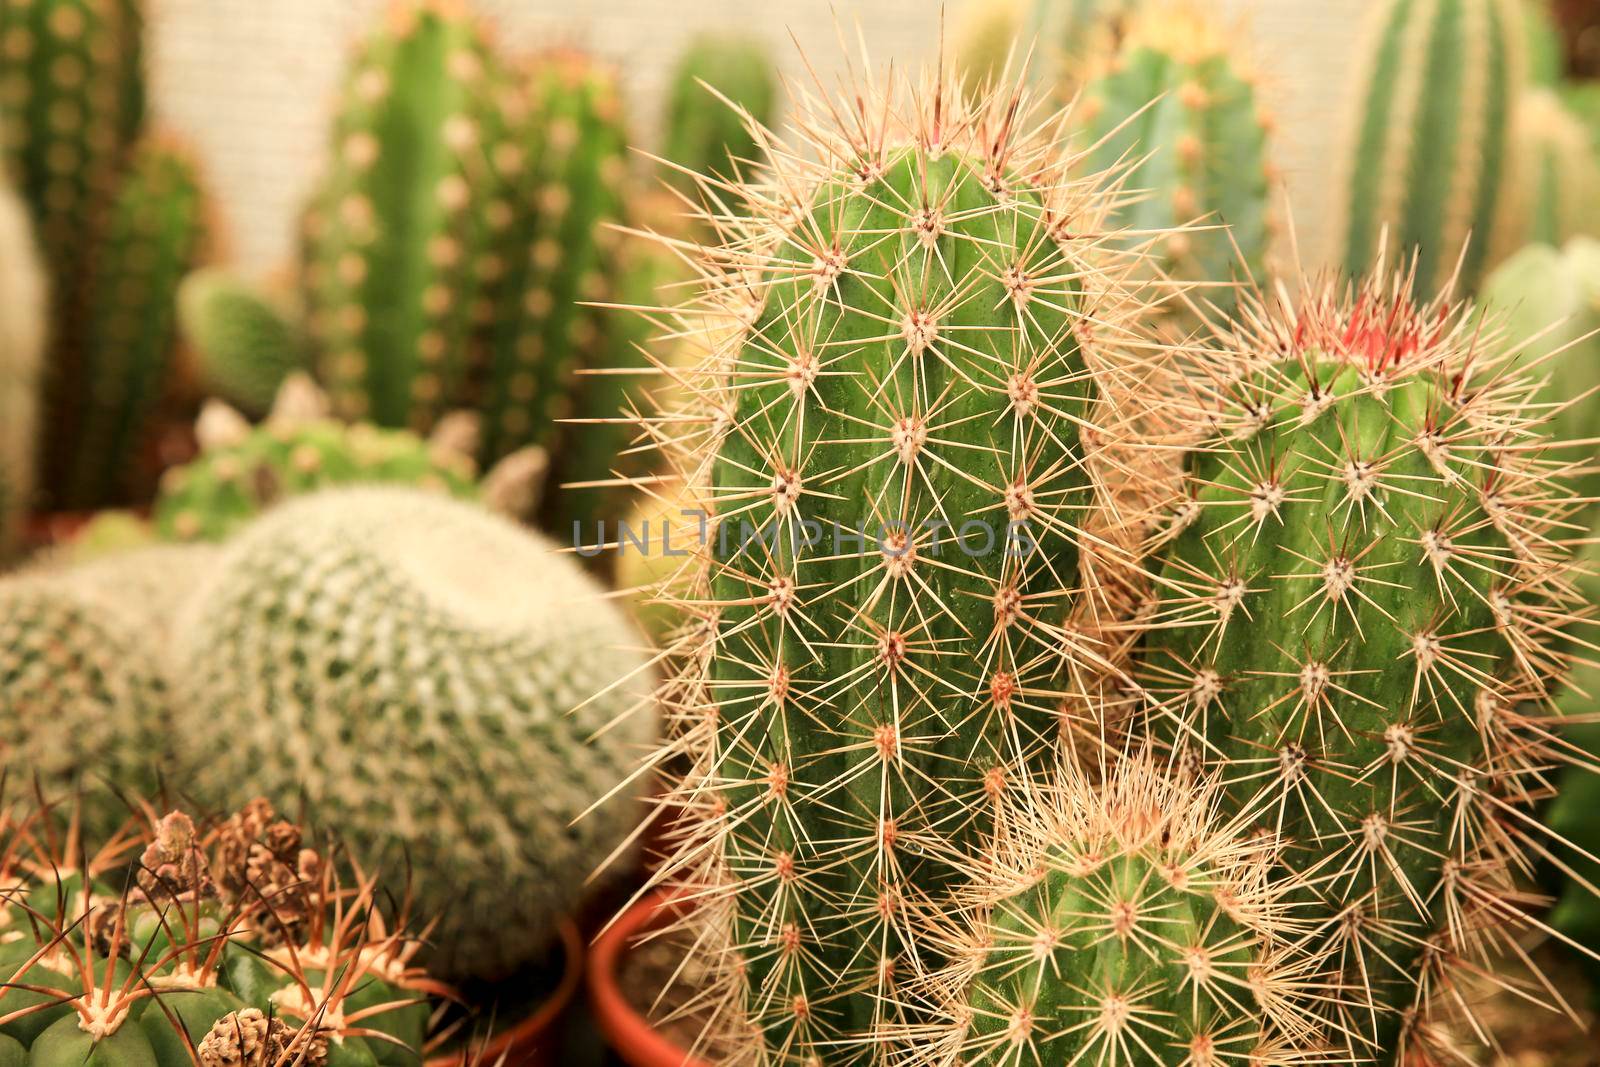 Pots of different kind of cactus for sale by soniabonet